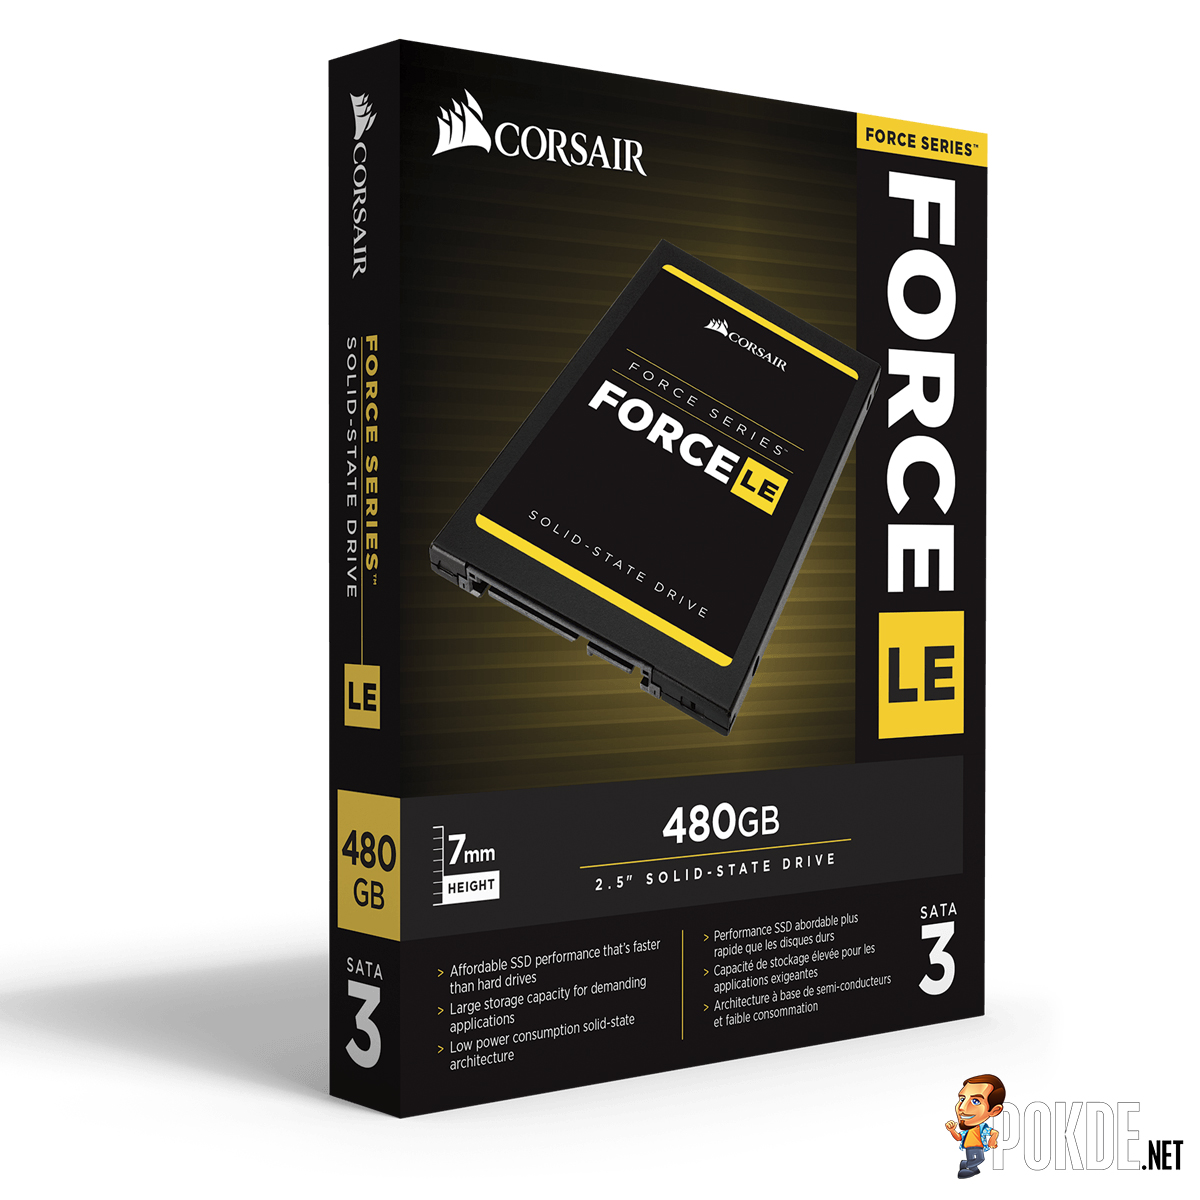 Corsair Force LE SSD is now available in Malaysia 31